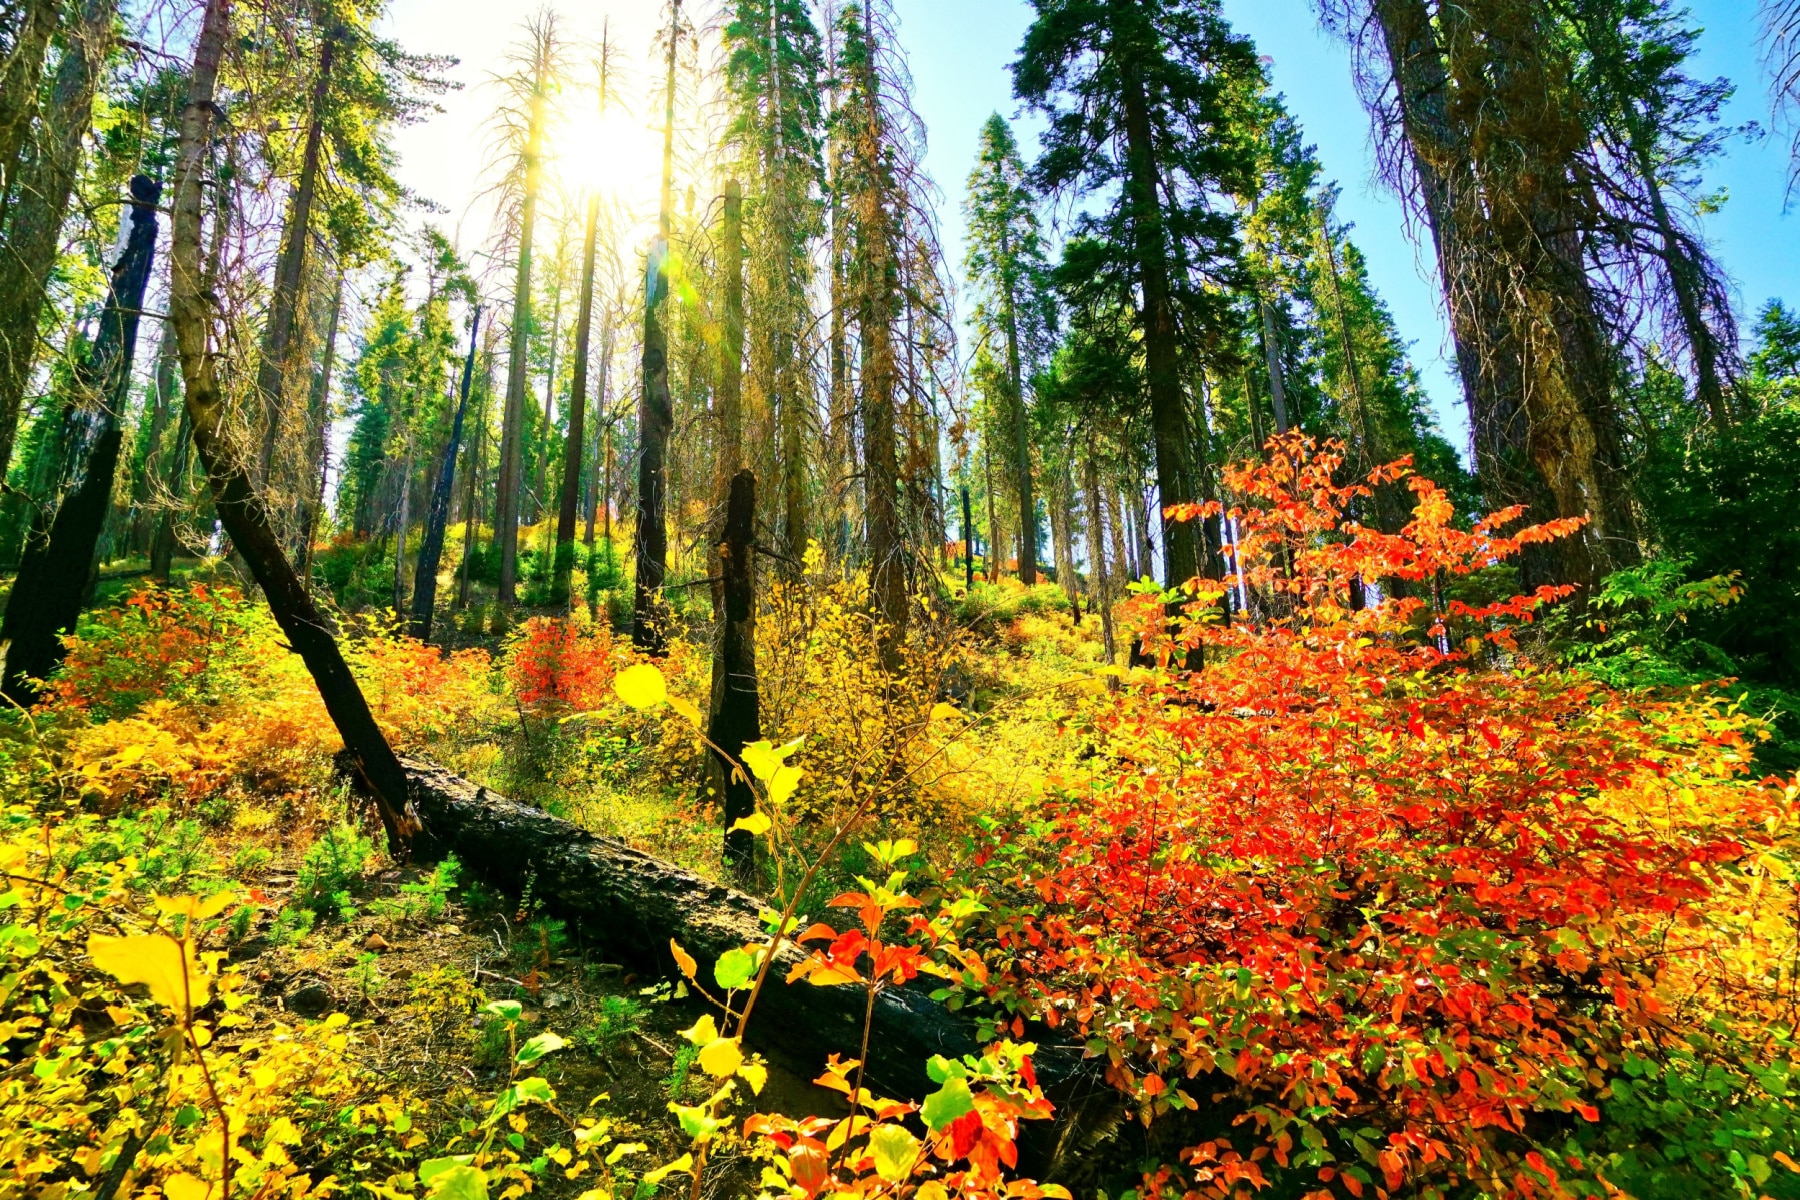 A blend of autumn colors in the forest of Yosemite National Park. 